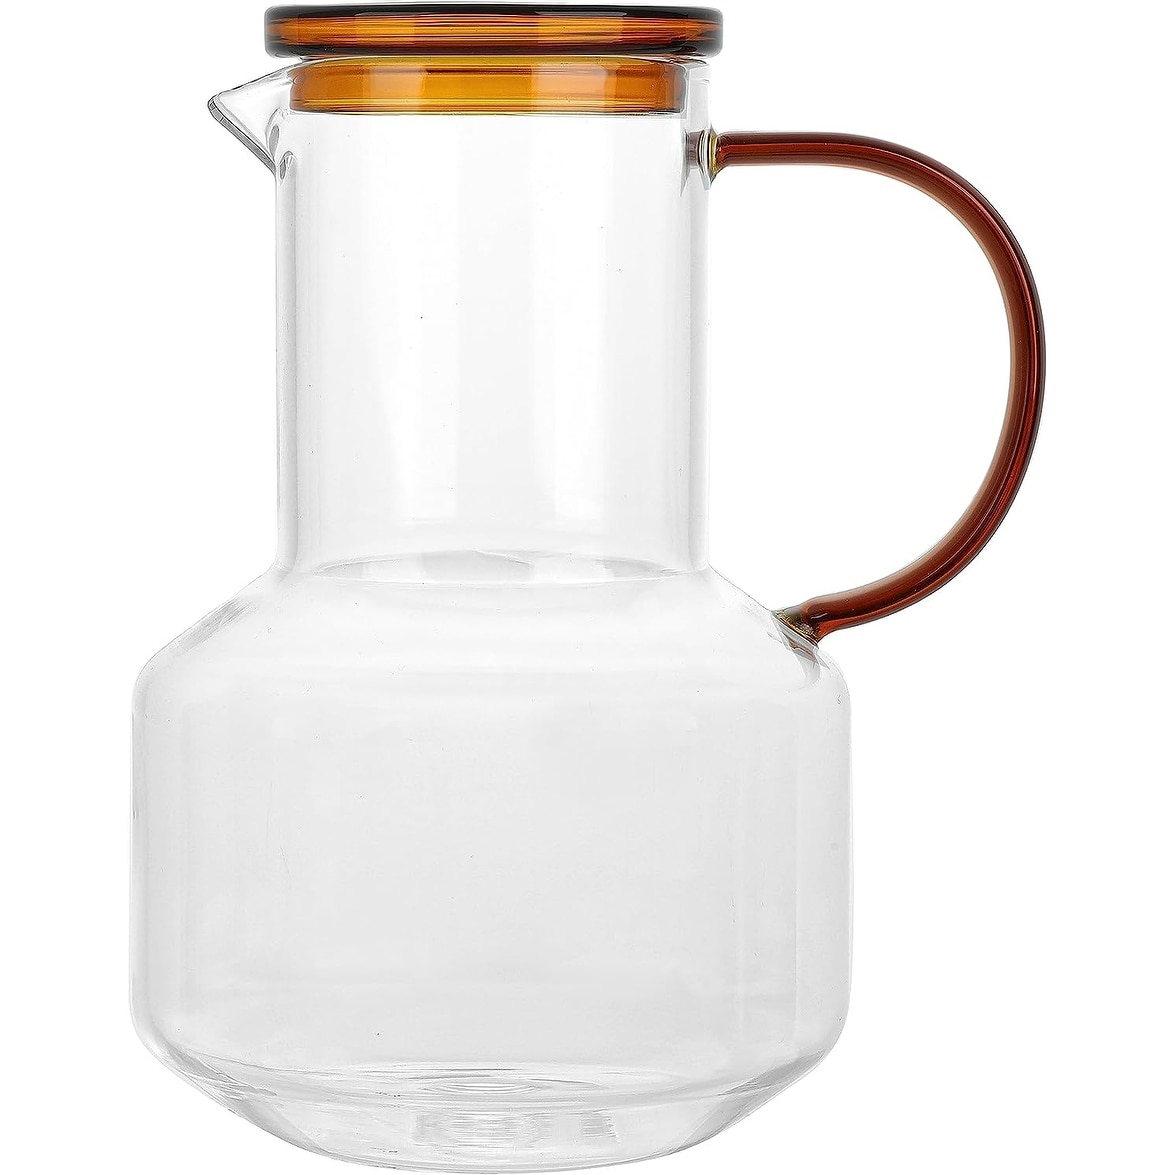 https://ak1.ostkcdn.com/images/products/is/images/direct/087c84e2fb6c18692235d7377efd84759fb4efb4/Elle-Decor-Glass-Pitcher-with-Amber-Lid-48-Ounce.jpg